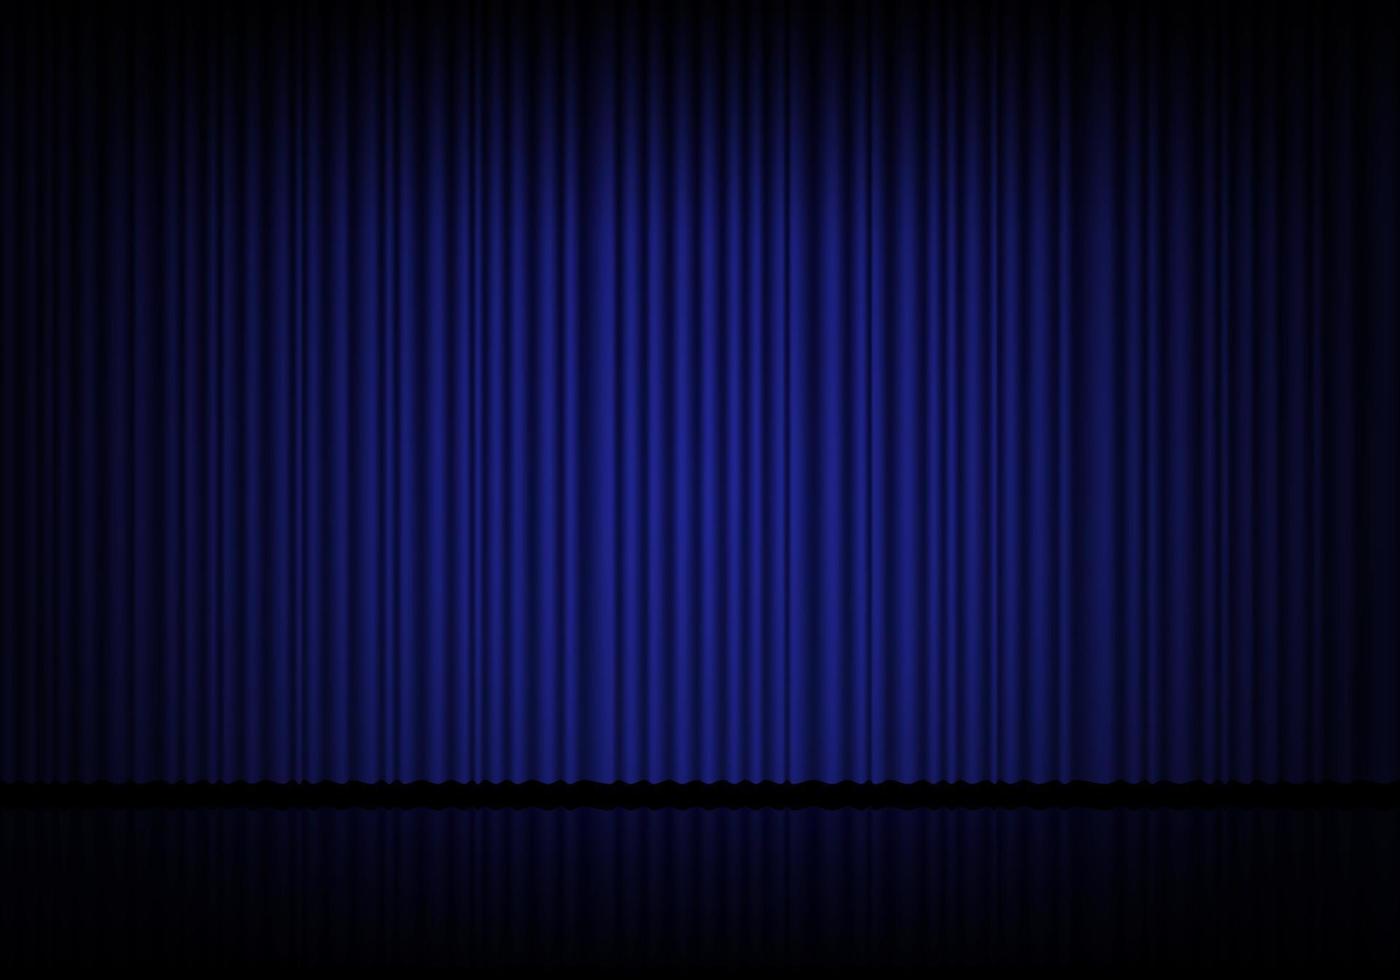 Blue curtain opera, cinema or theater stage drapes. Spotlight on closed velvet curtains background. Vector illustration